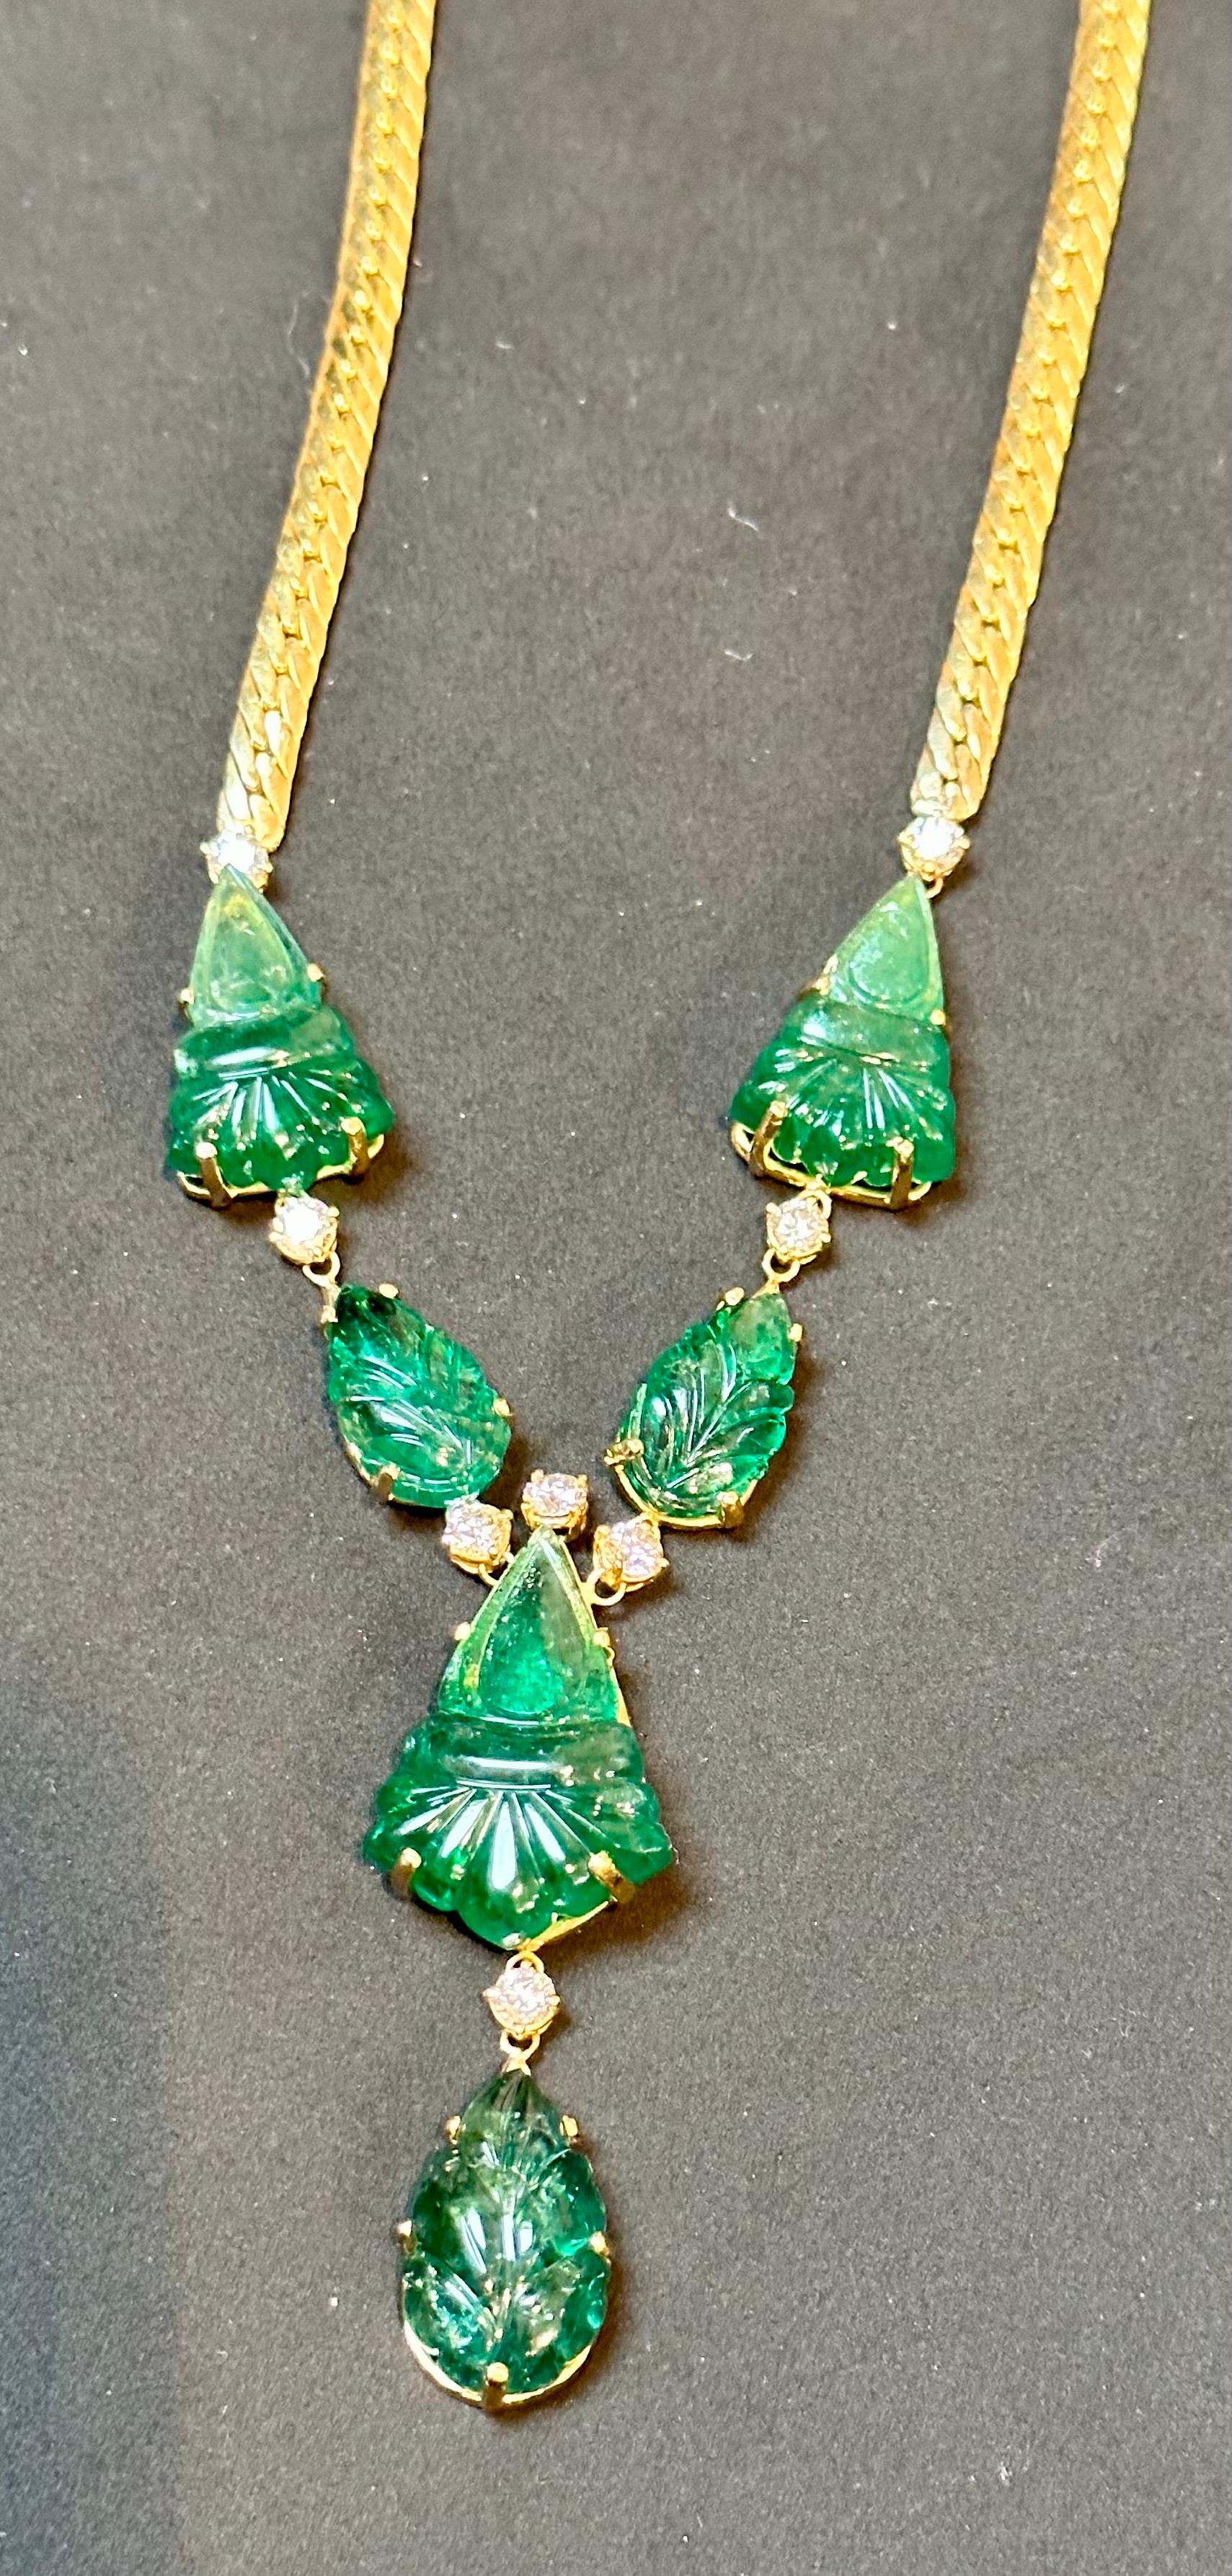 115 Ct Natural Carved Drop Emerald & 4 Ct Diamond  Necklace 18 Kt Gold Necklace For Sale 4